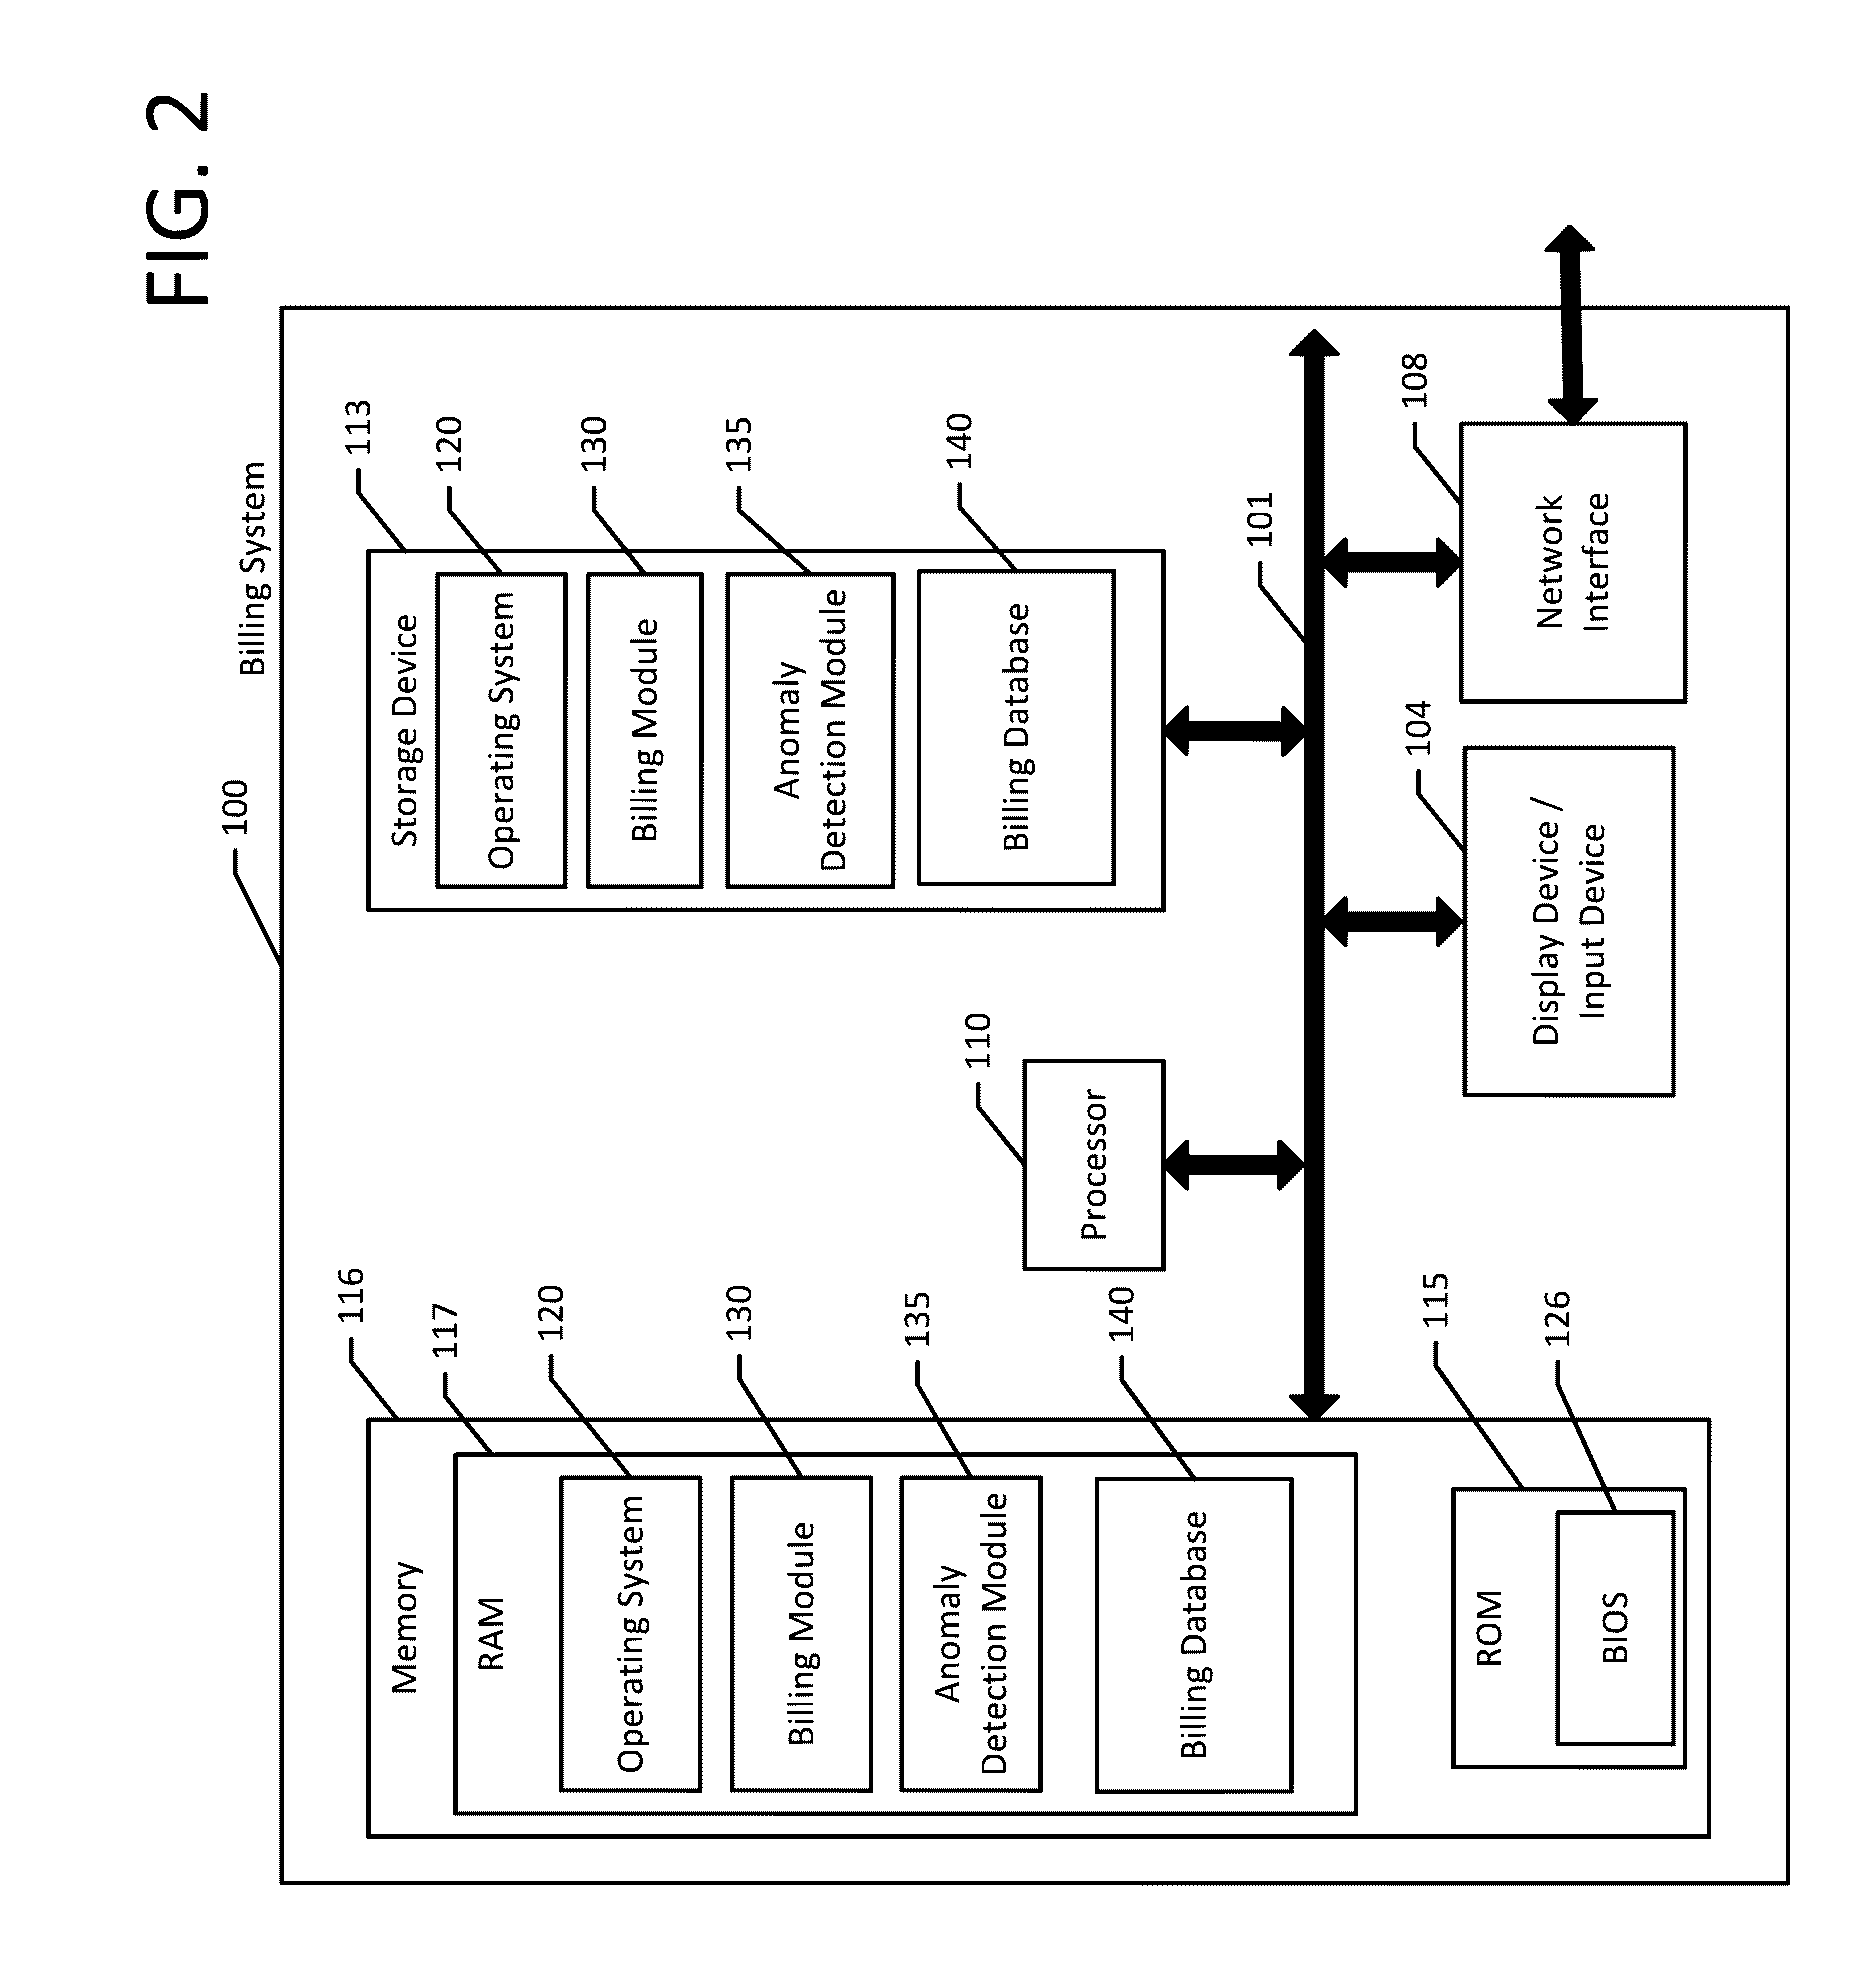 Systems, methods, and computer program products for detecting billing anomalies